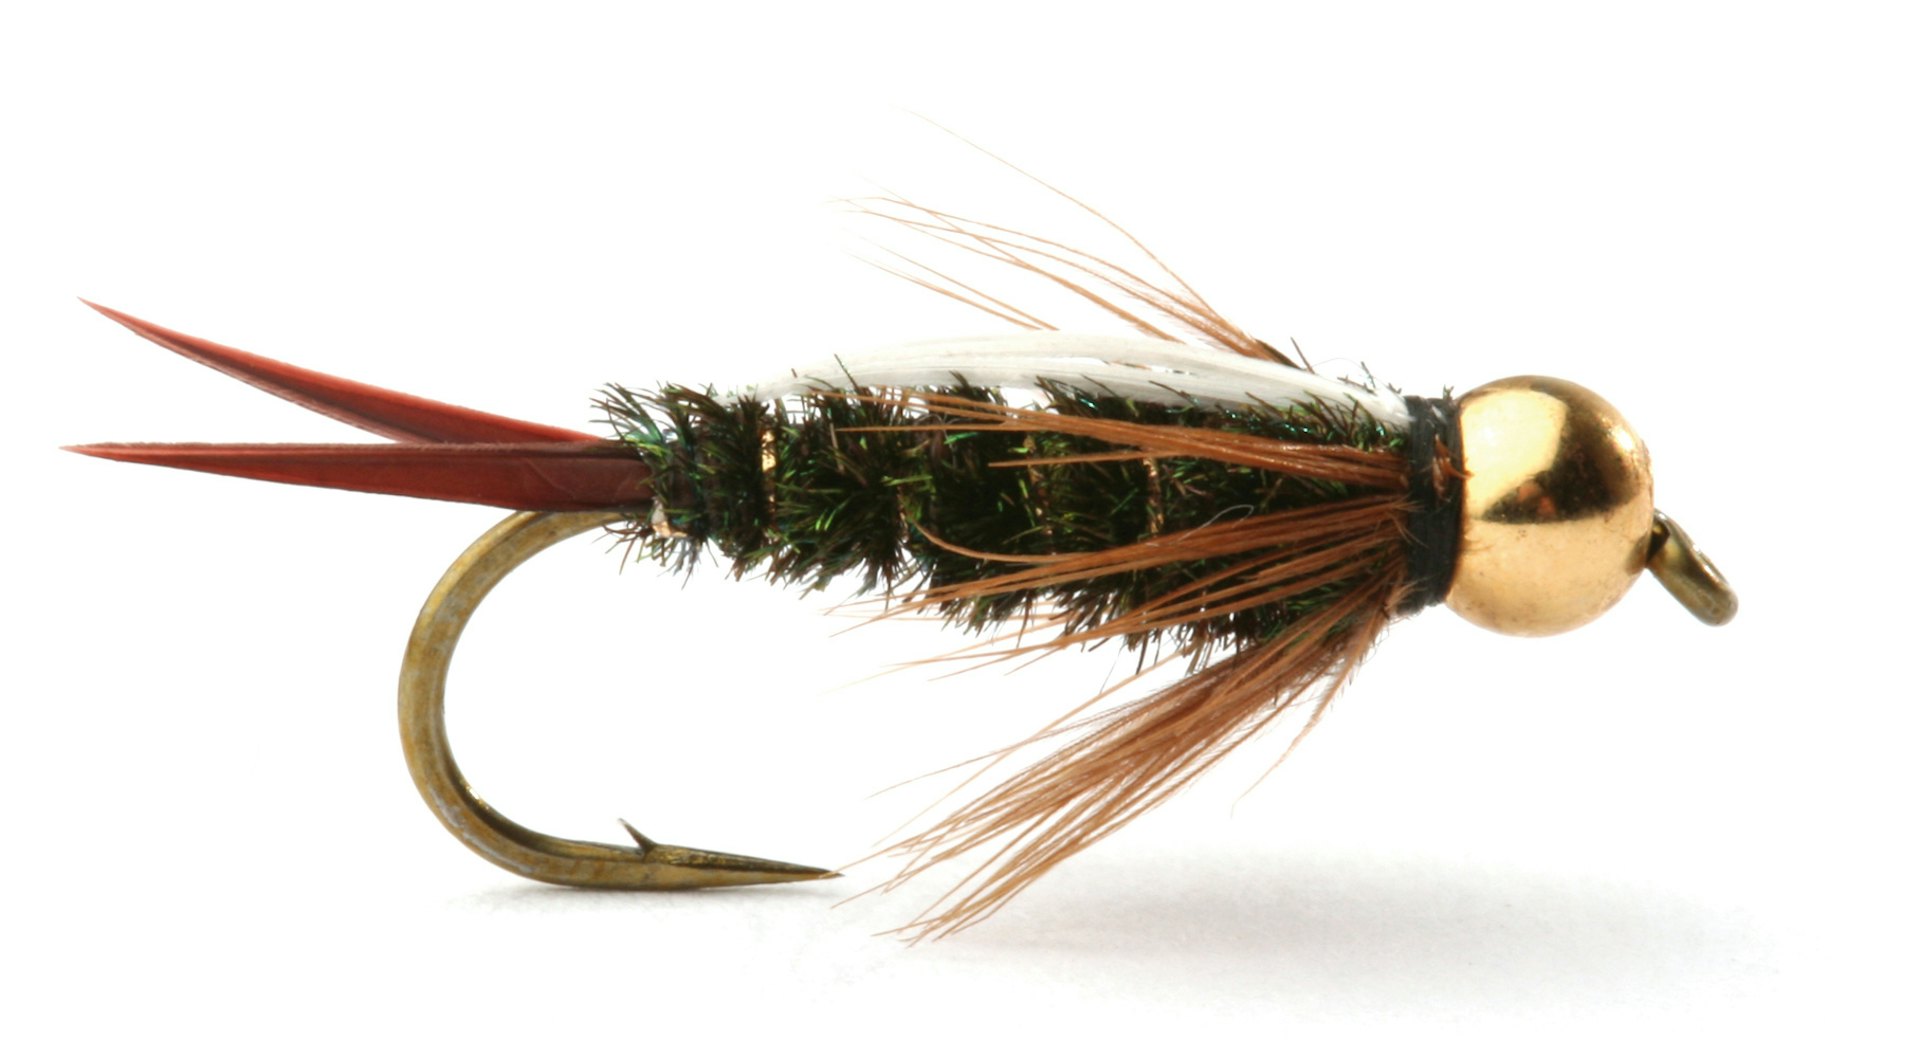 Bead Head Prince Nymph Fly - Hook Size 12 - Trout Fly Fishing